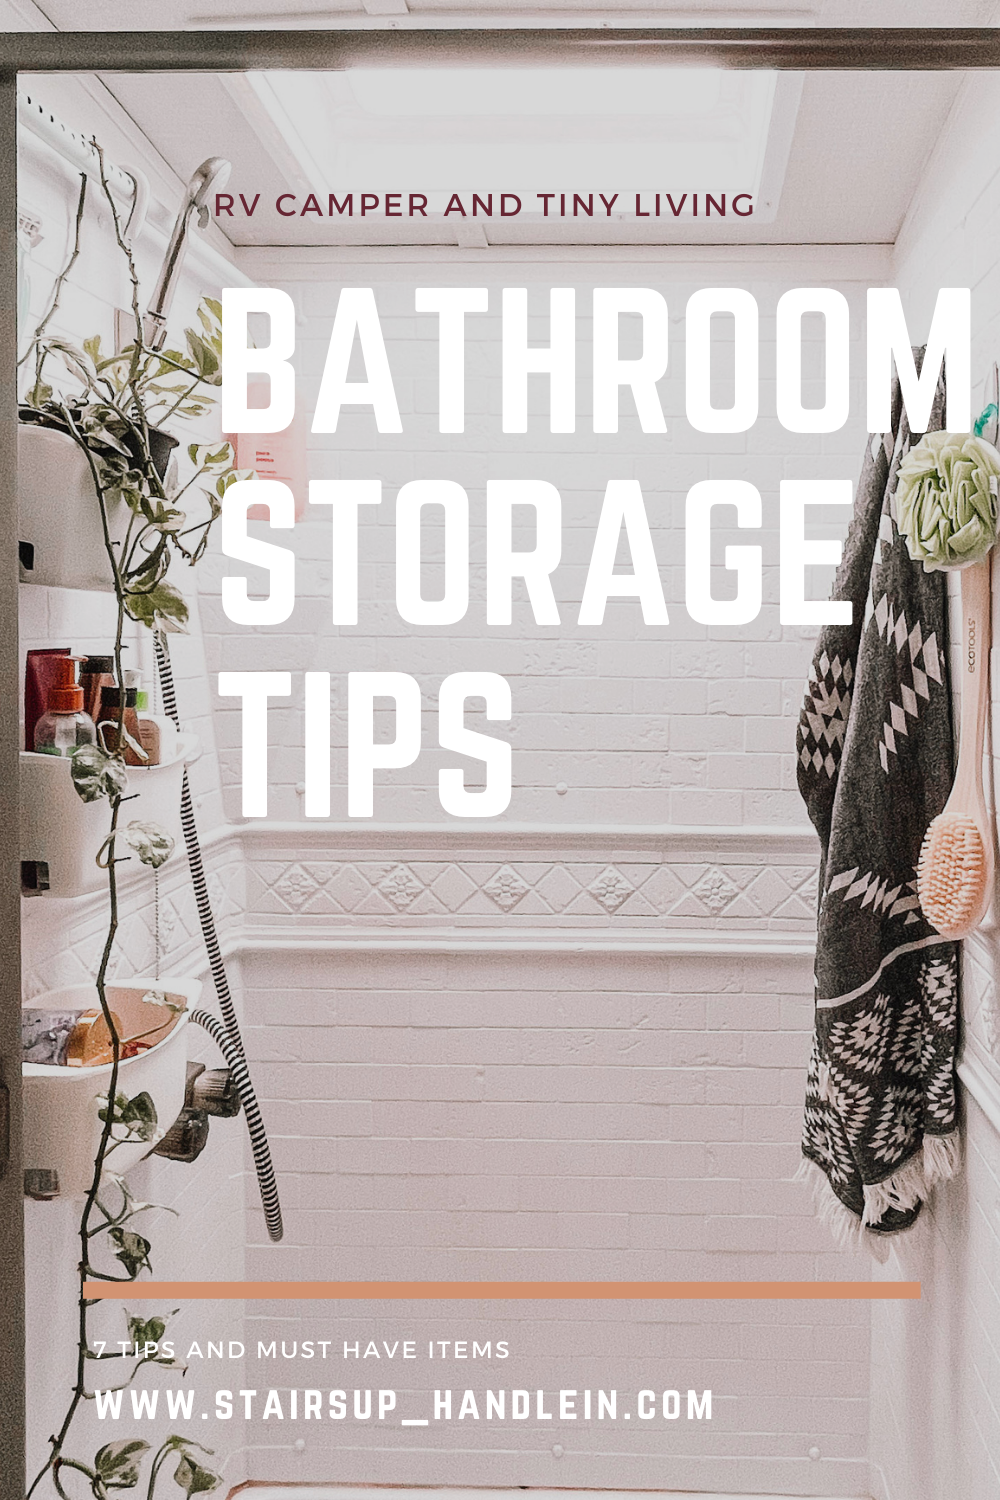 Lastly - we shared 7 Tips and Must Haves to help organize your RV Bathroom space on Stairs Up - Handle In